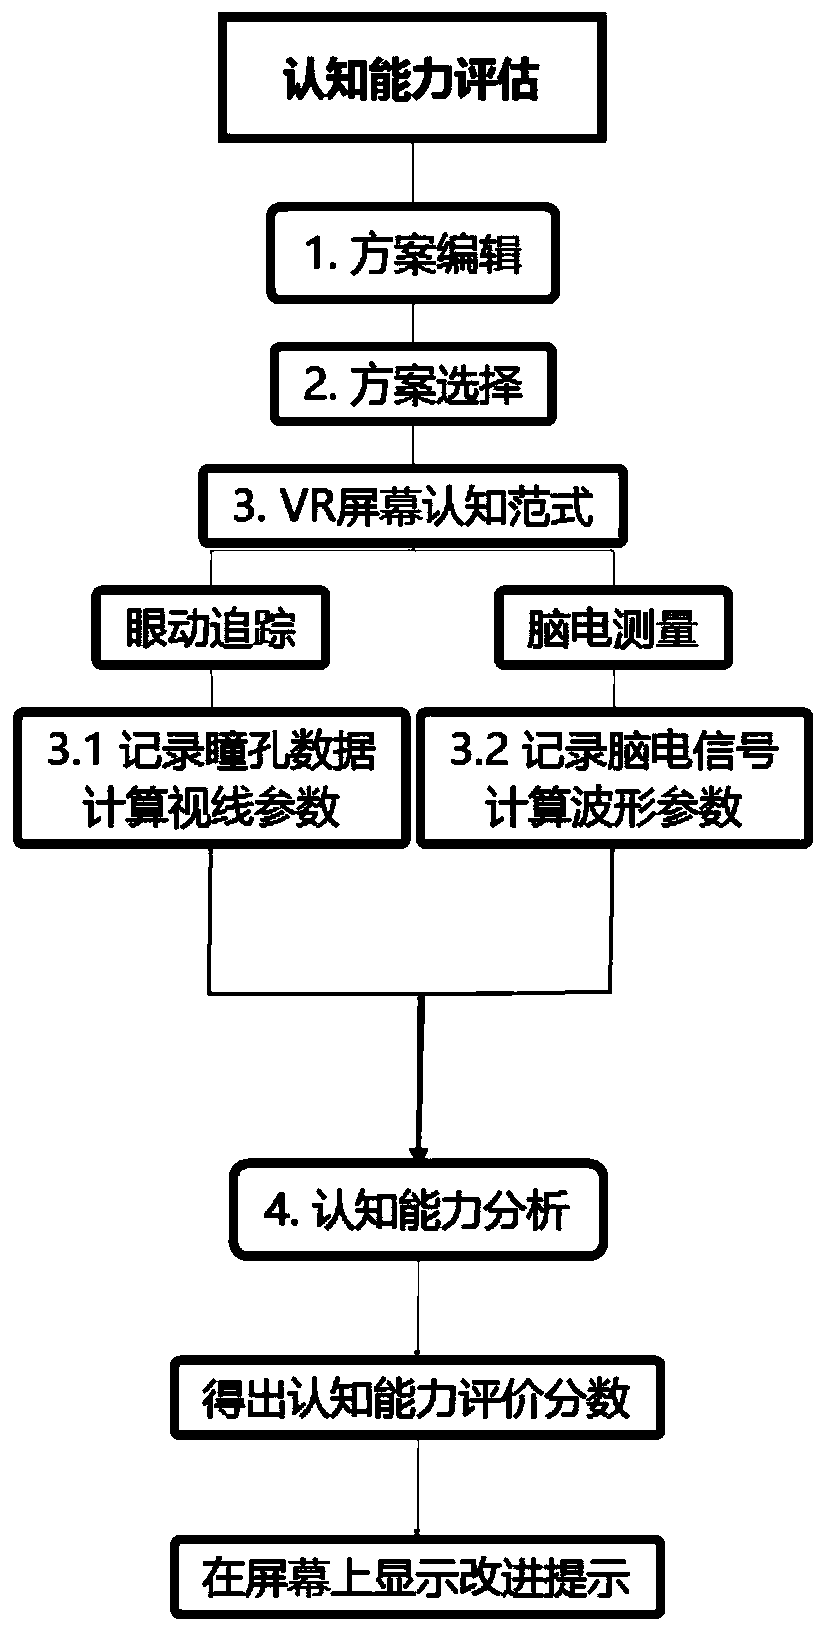 Cognitive competence evaluation system and method based on eye movement and electroencephalogram characteristics